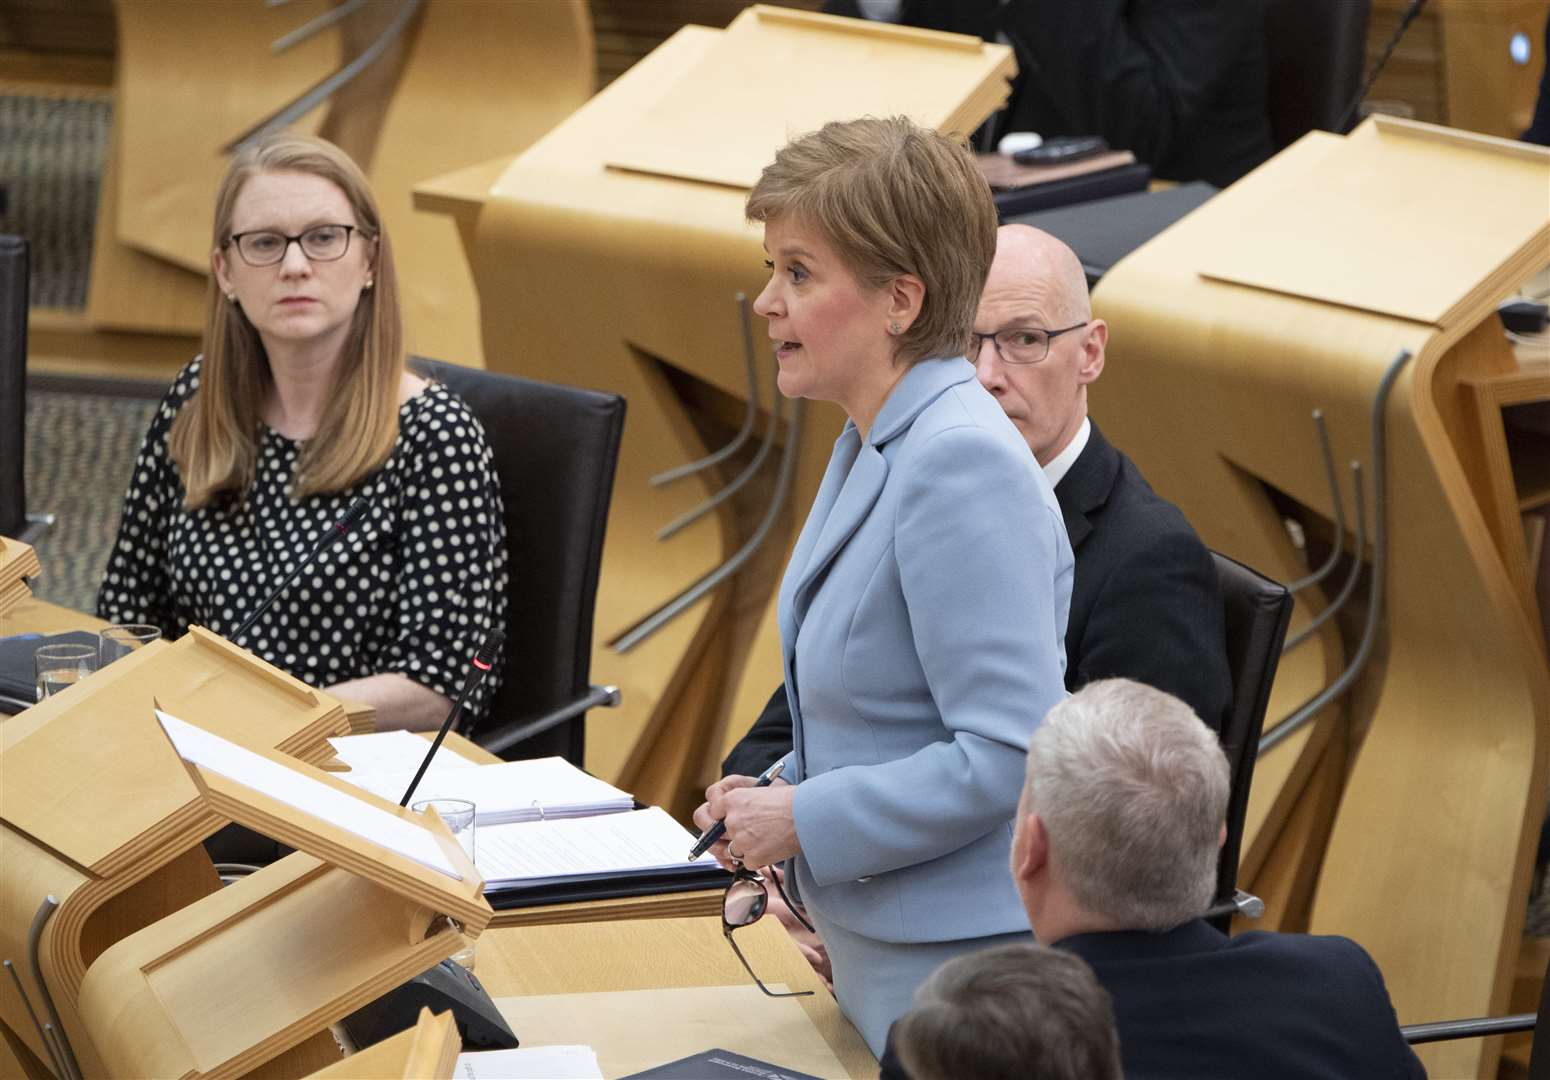 Nicola Sturgeon sought to head off any legal challenge (Lesley Martin/PA)